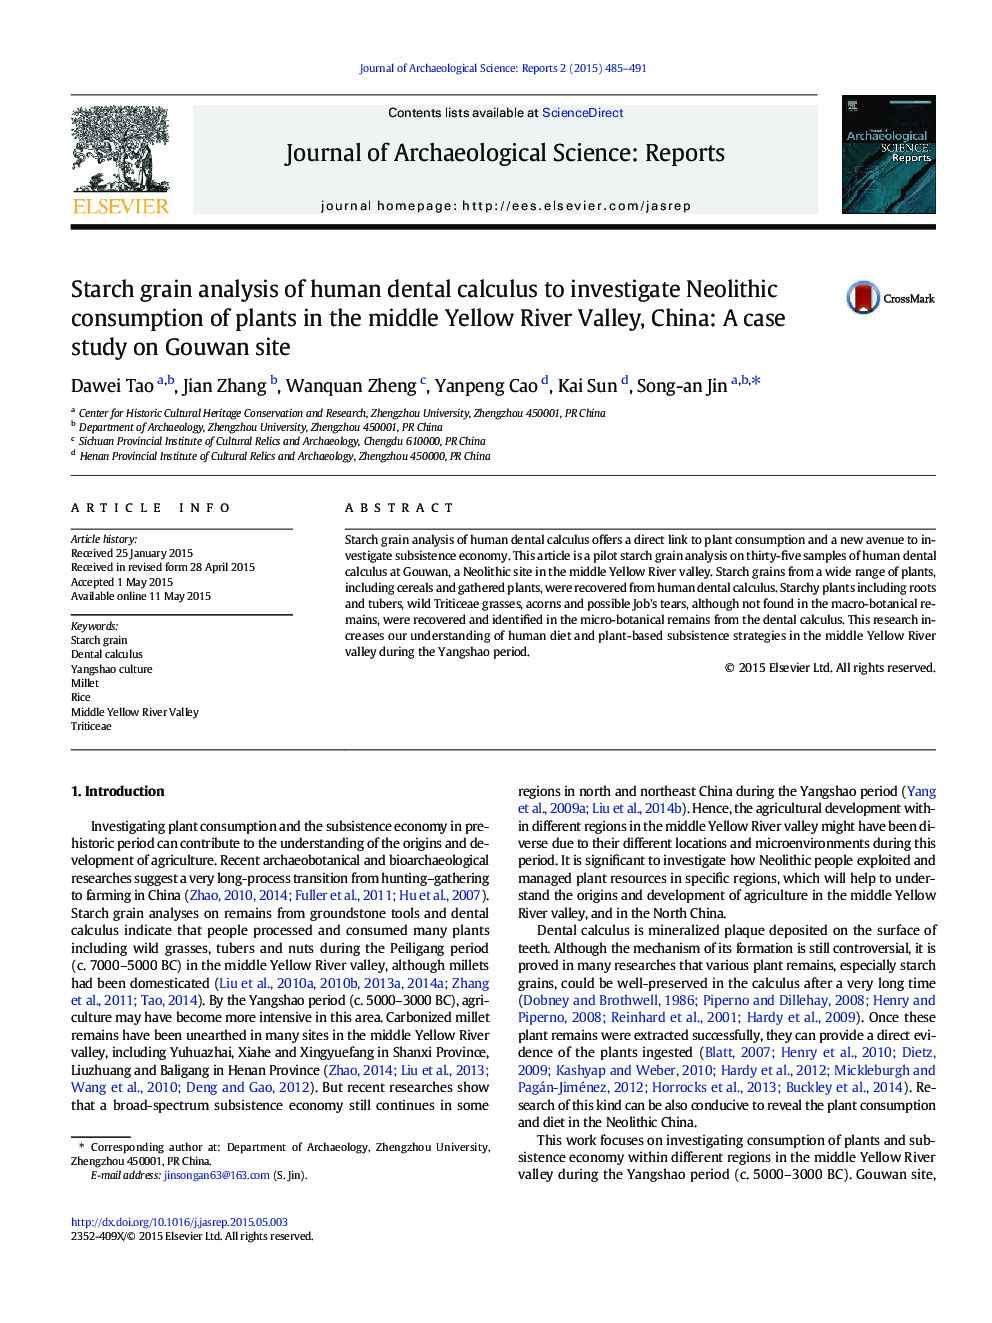 Starch grain analysis of human dental calculus to investigate Neolithic consumption of plants in the middle Yellow River Valley, China: A case study on Gouwan site